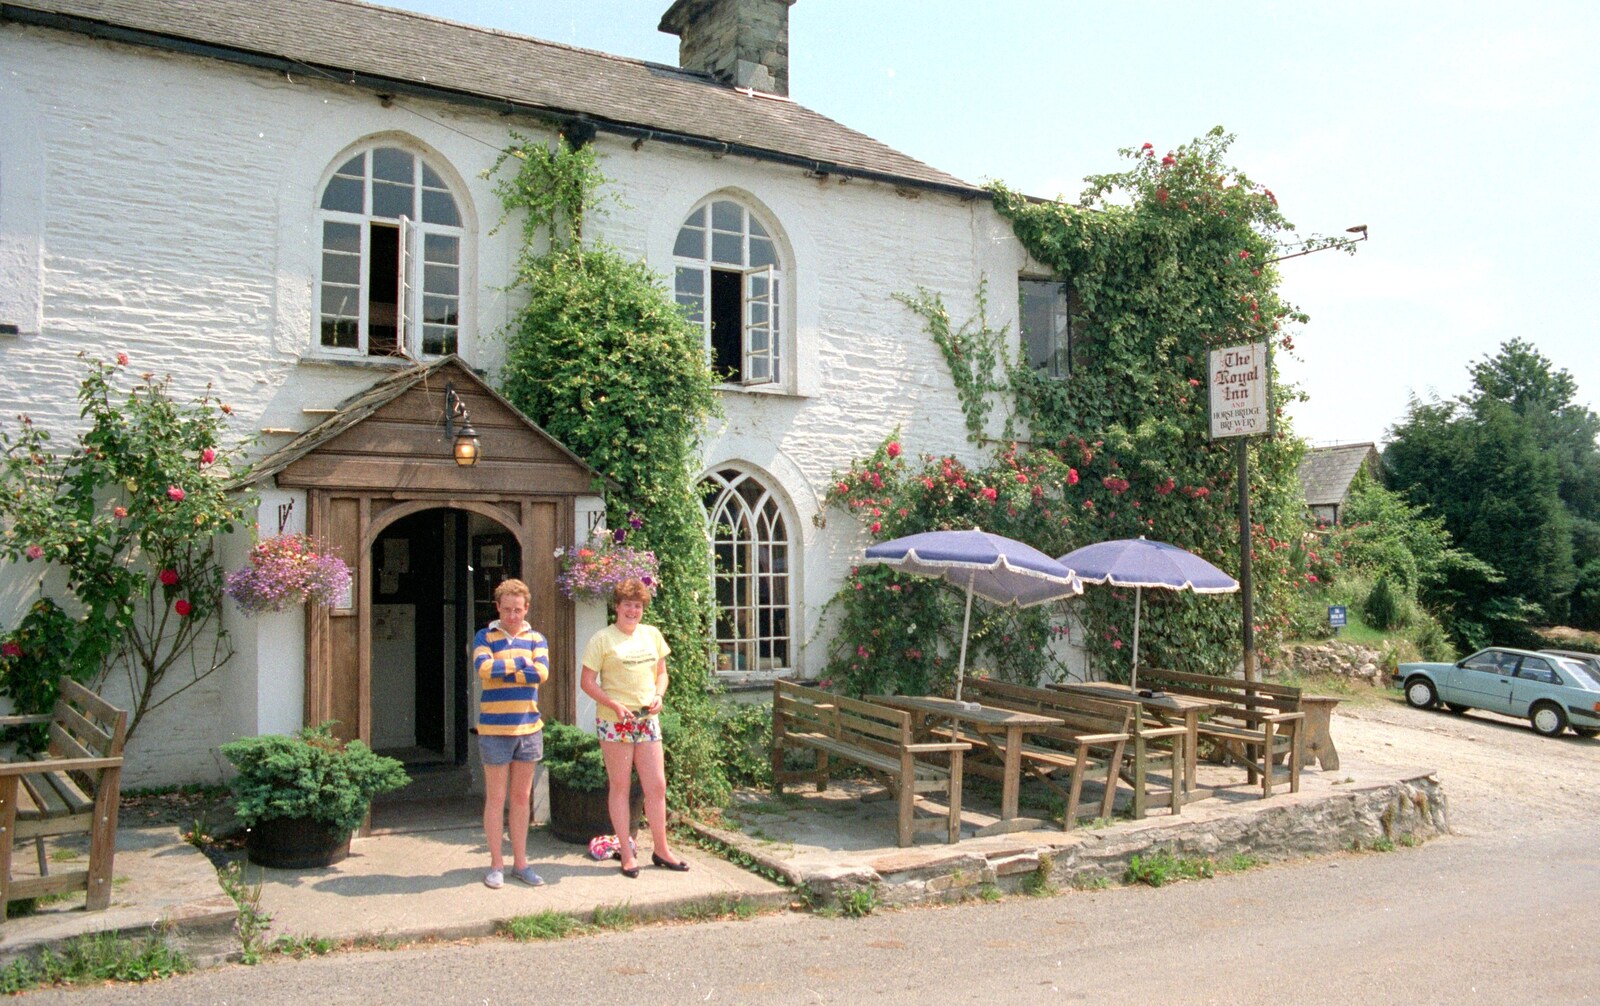 Uni: Country Clubs, On The Beach and Organs, Plymouth - 28th May 1989: Andrew and Kate outside the Royal Inn in Horsebridge, near Tavistock